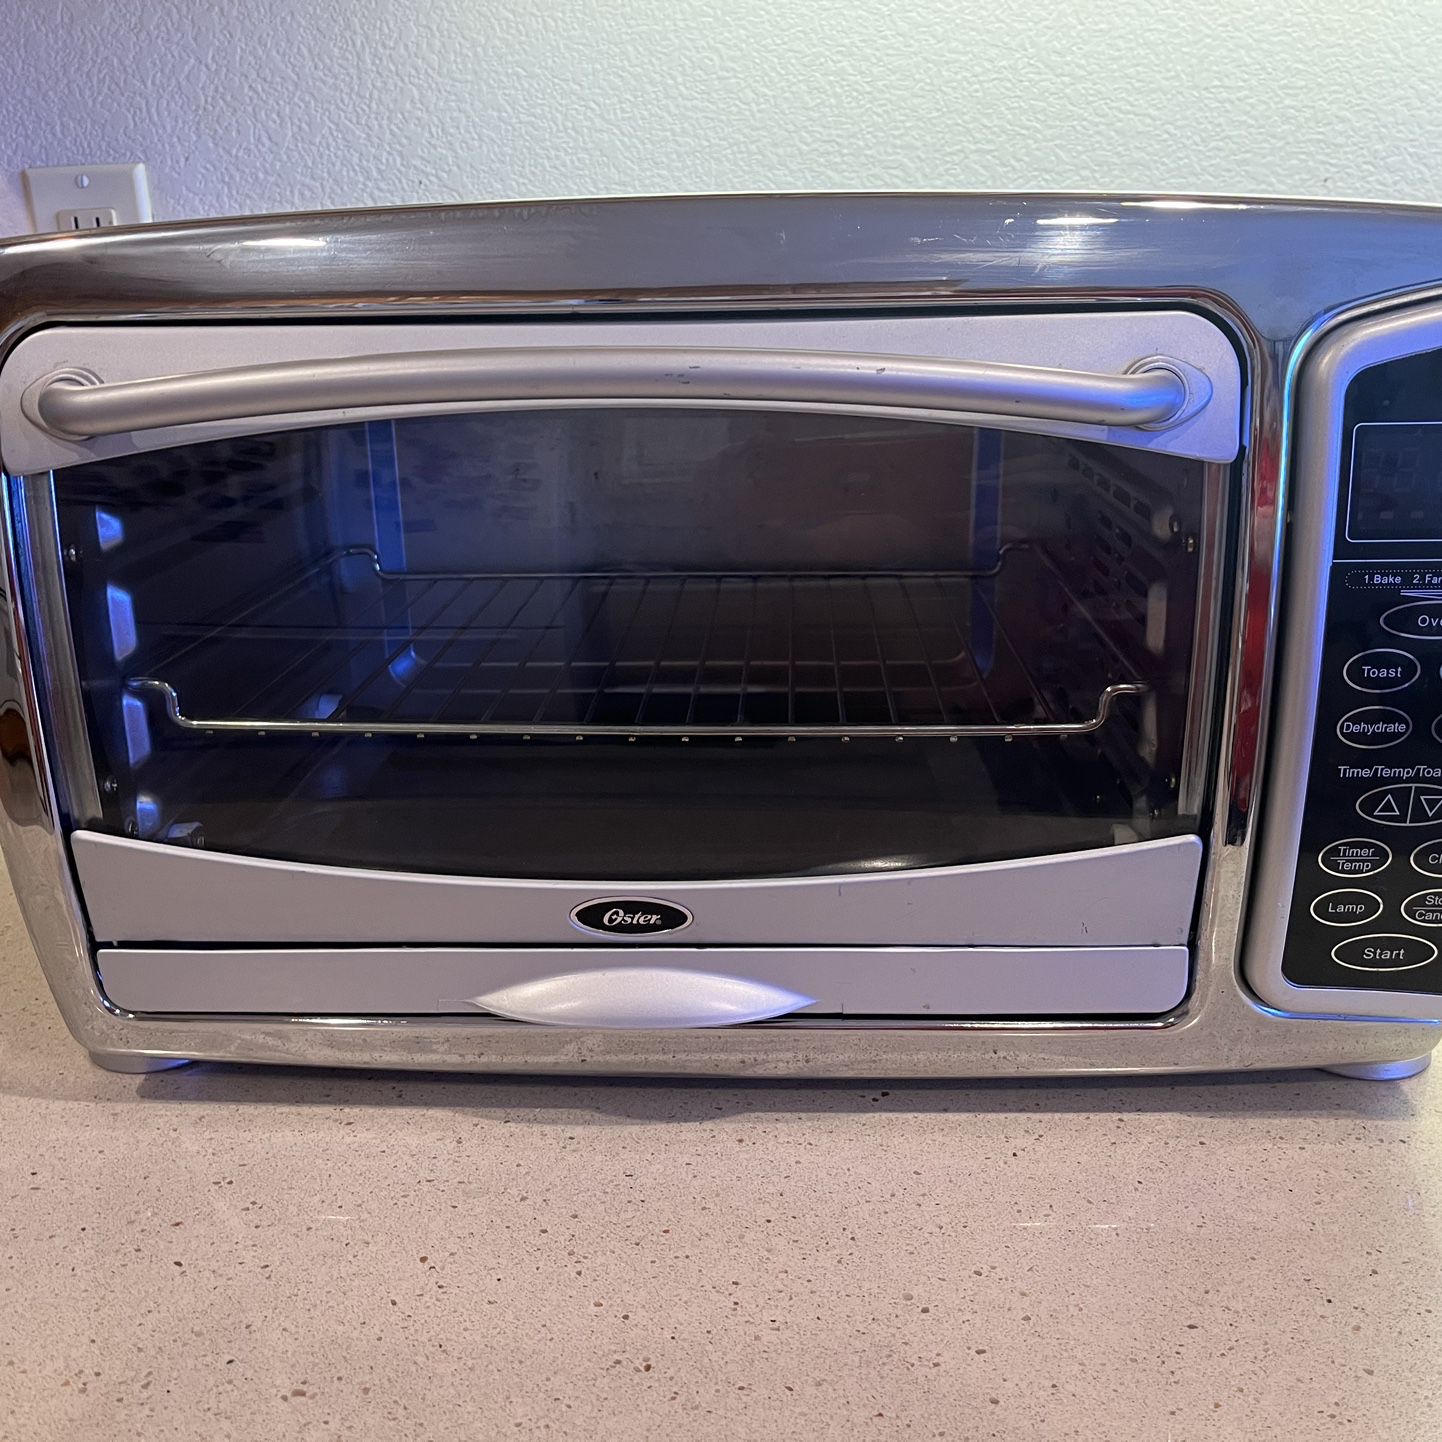 Bella Toaster Oven for Sale in Salinas, CA - OfferUp